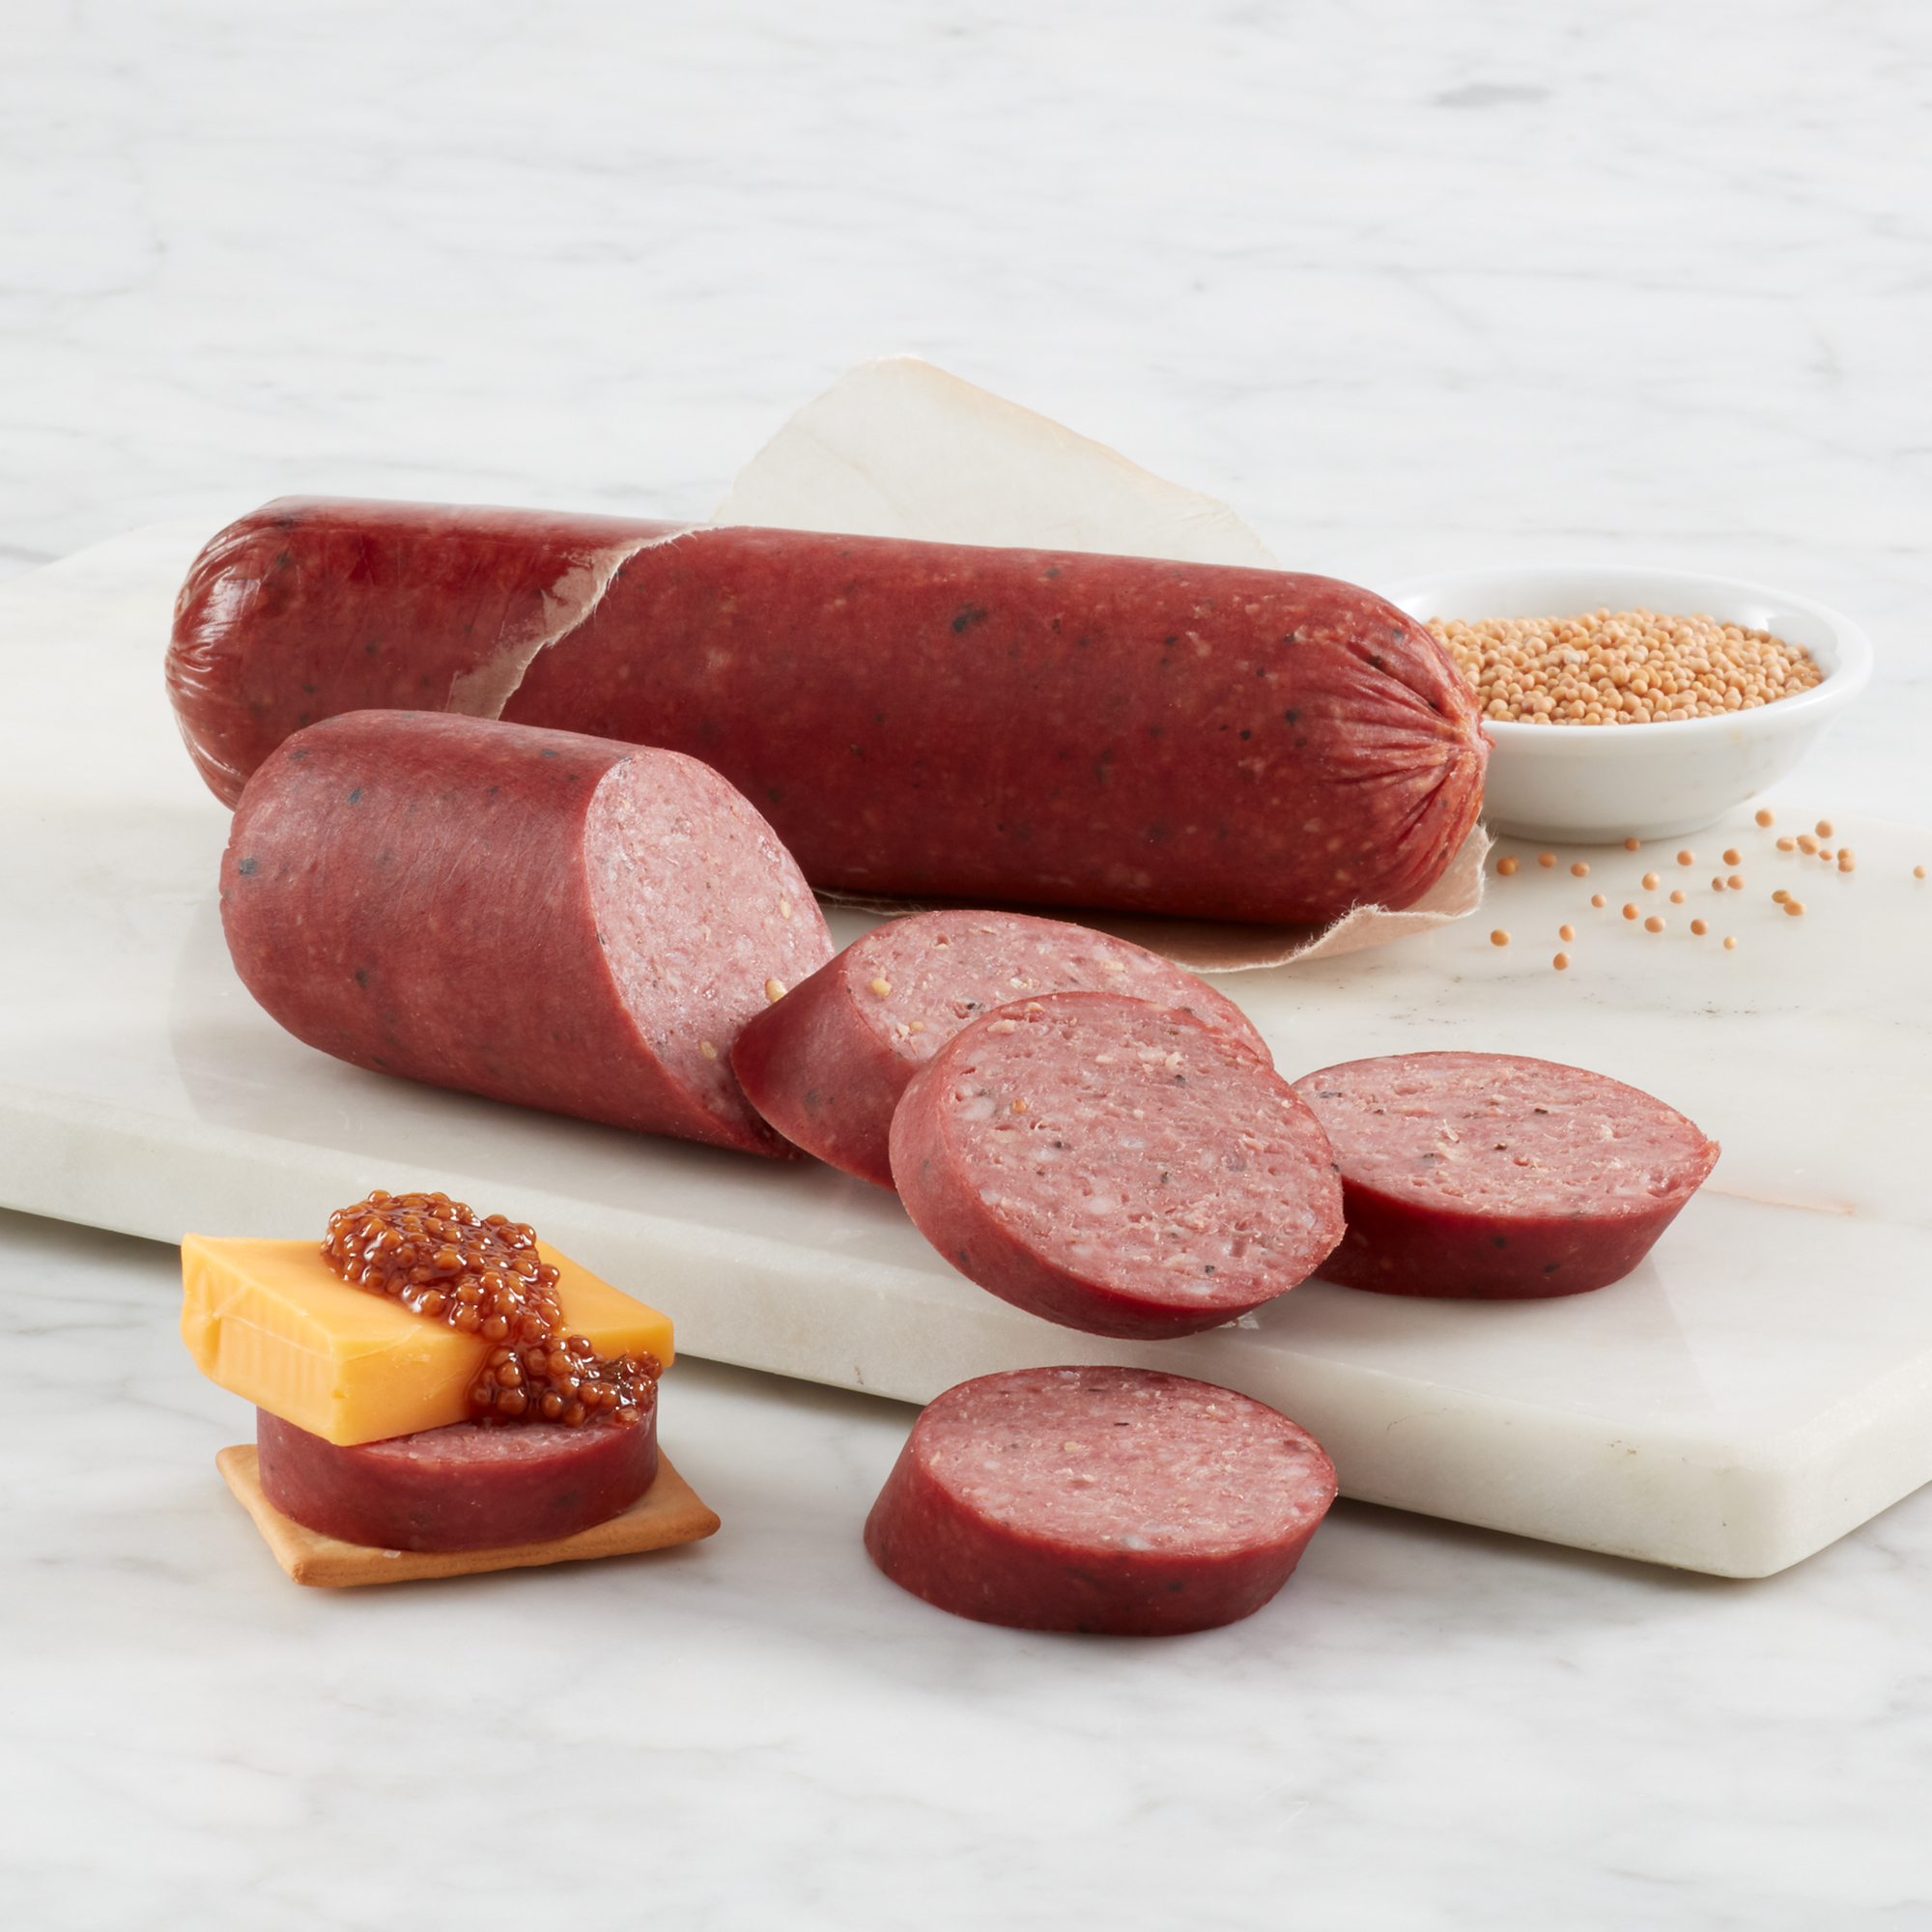 https://www.hickoryfarms.com/on/demandware.static/-/Sites-Web-Master-Catalog/default/dw3d9beadf/images/products/all-natural-beef-summer-sausage-3731-1.jpg